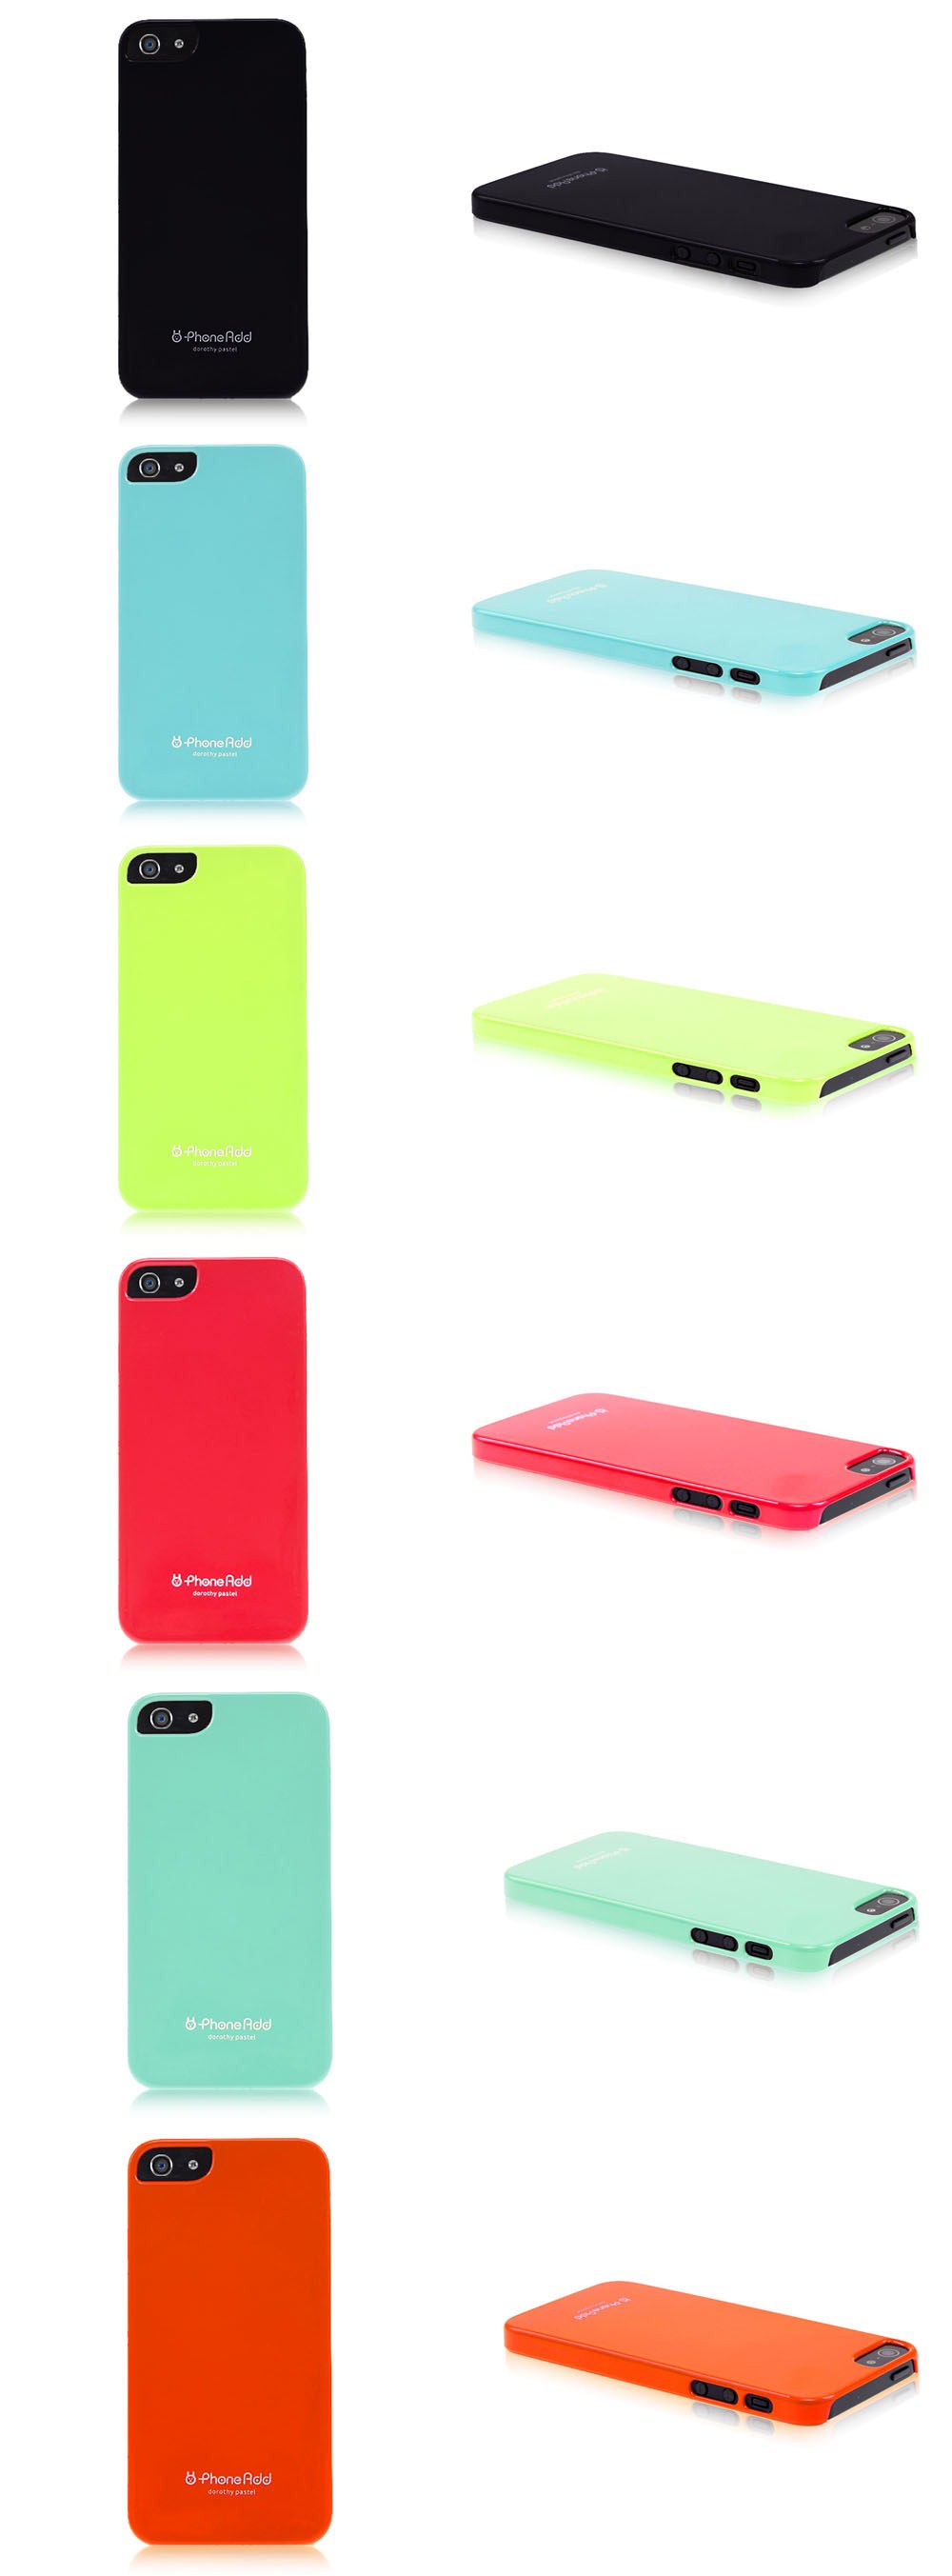 Colorful iPhone 5 Cases